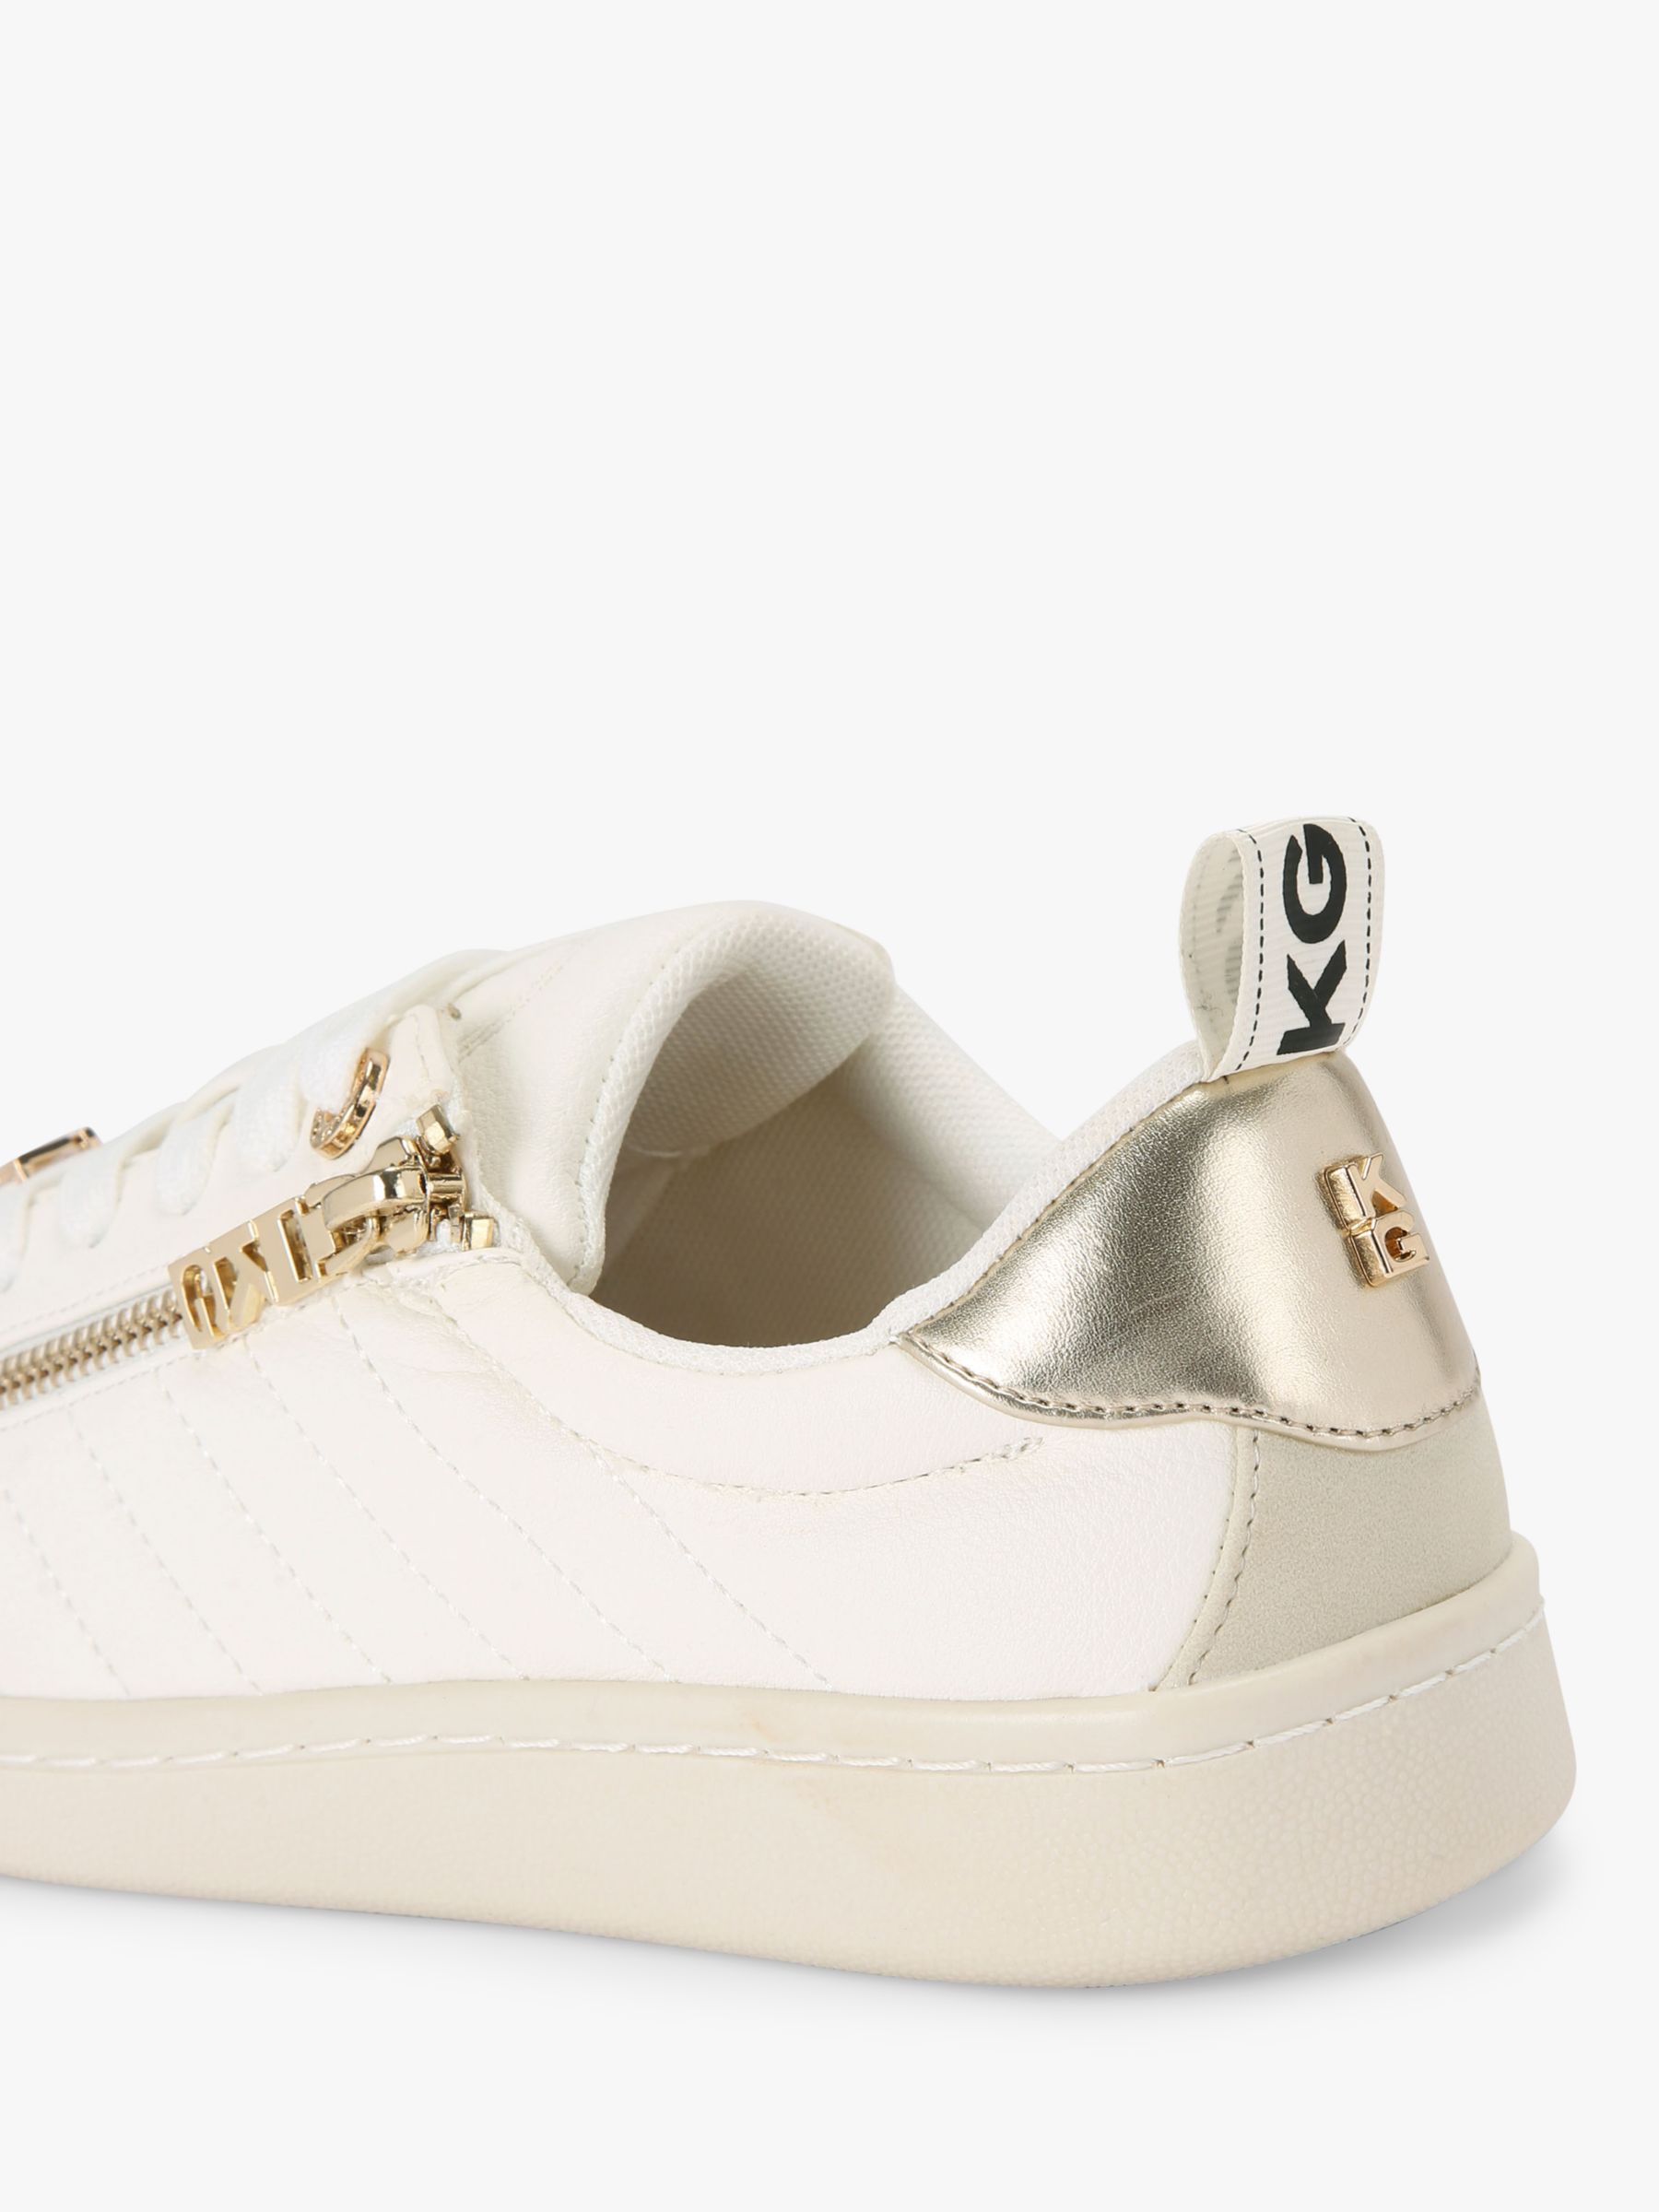 KG Kurt Geiger Liza Zip Quilted Trainers, White at John Lewis & Partners